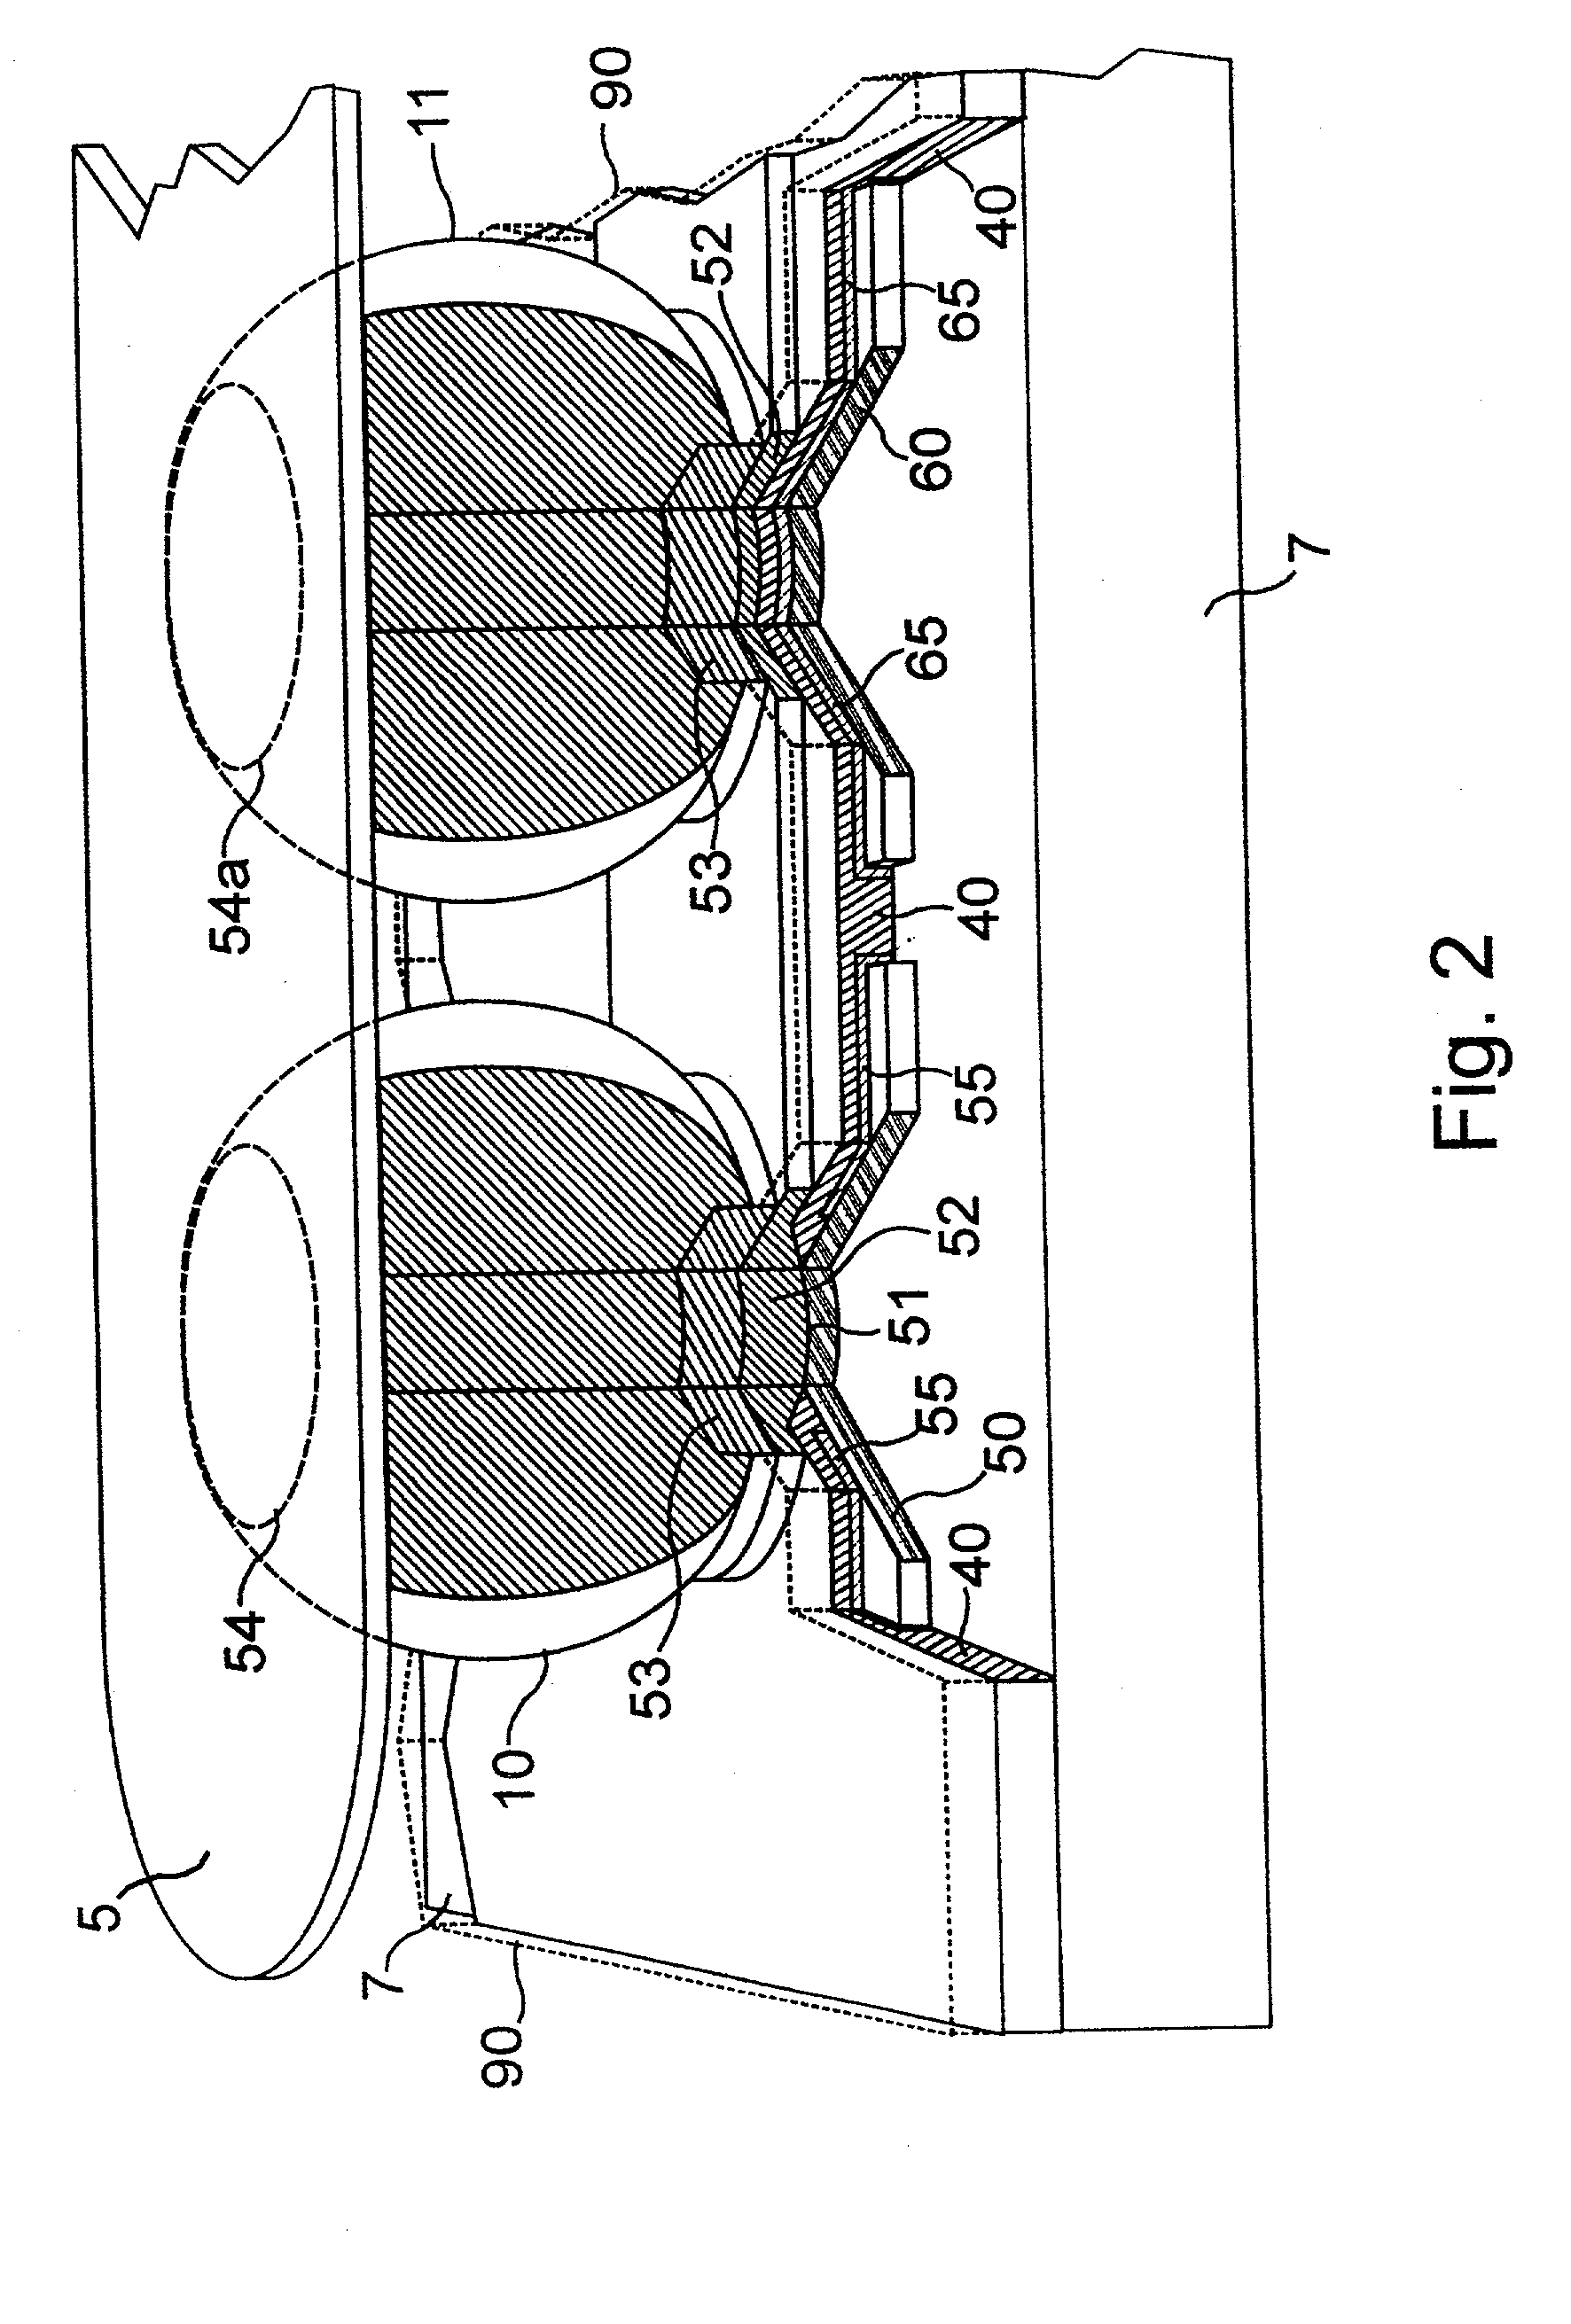 Supporting gate contacts over source region on mosfet devices